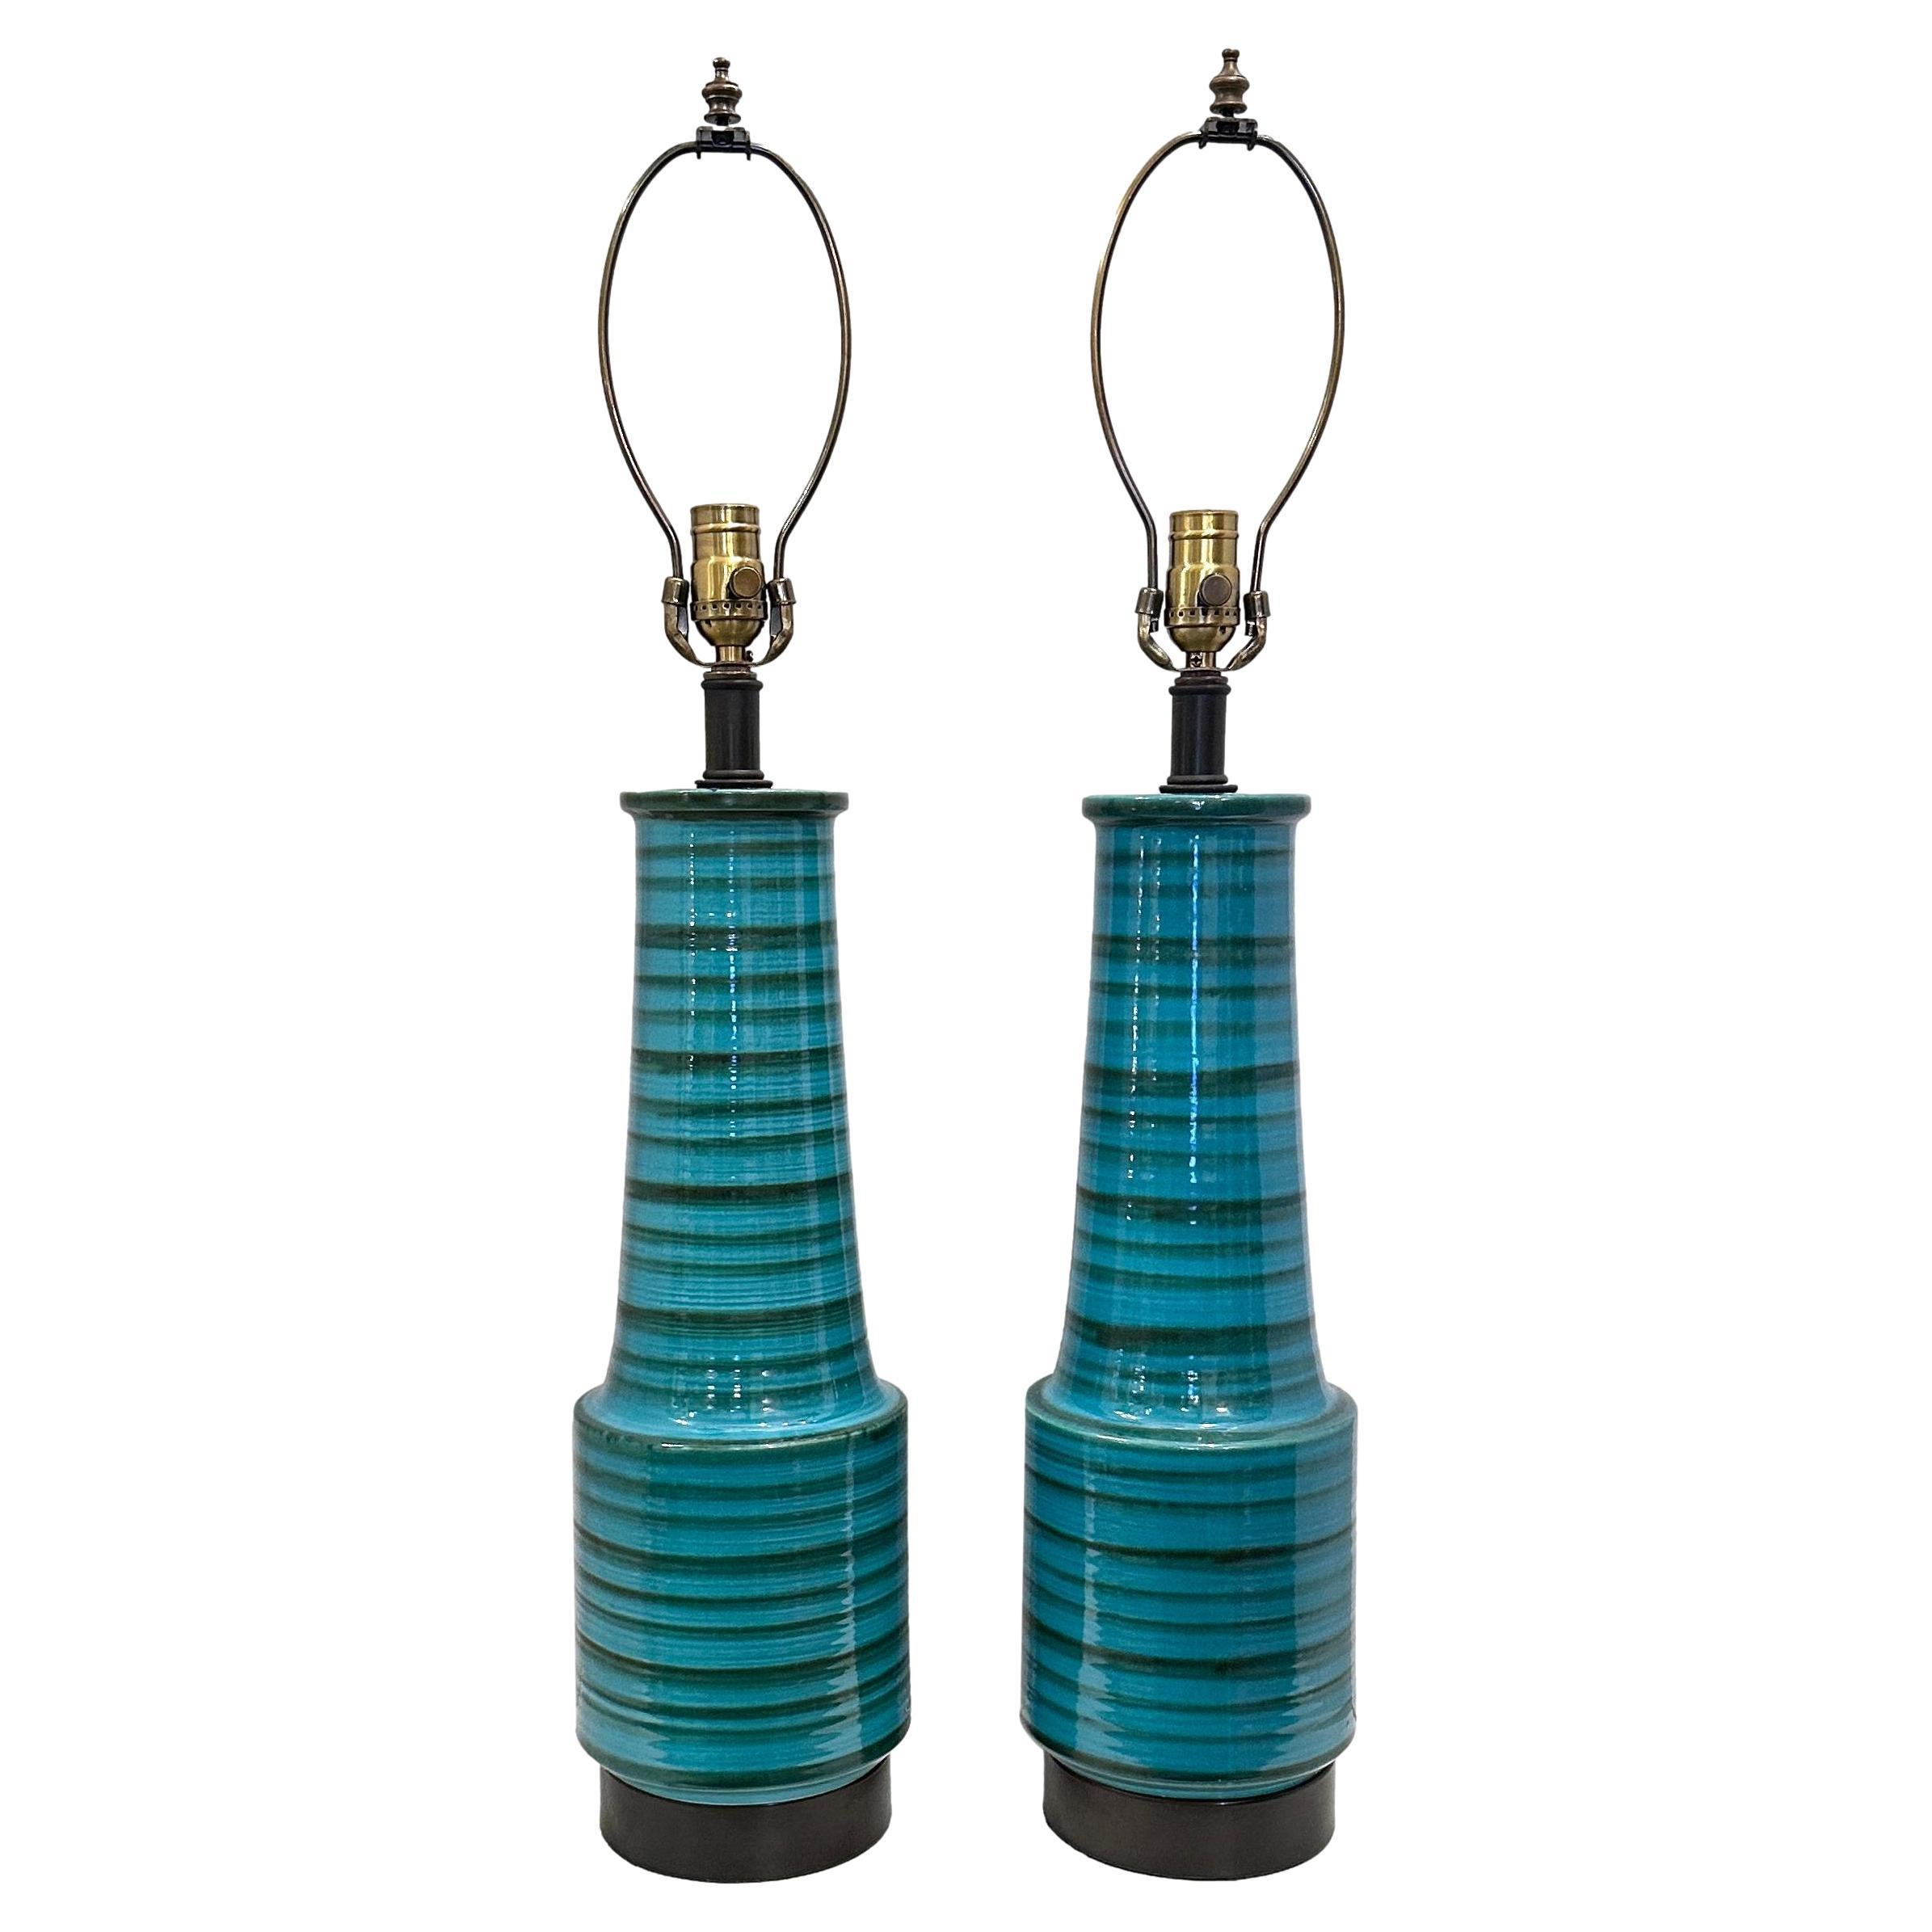 Pair of Midcentury Striped Blue Table Lamps